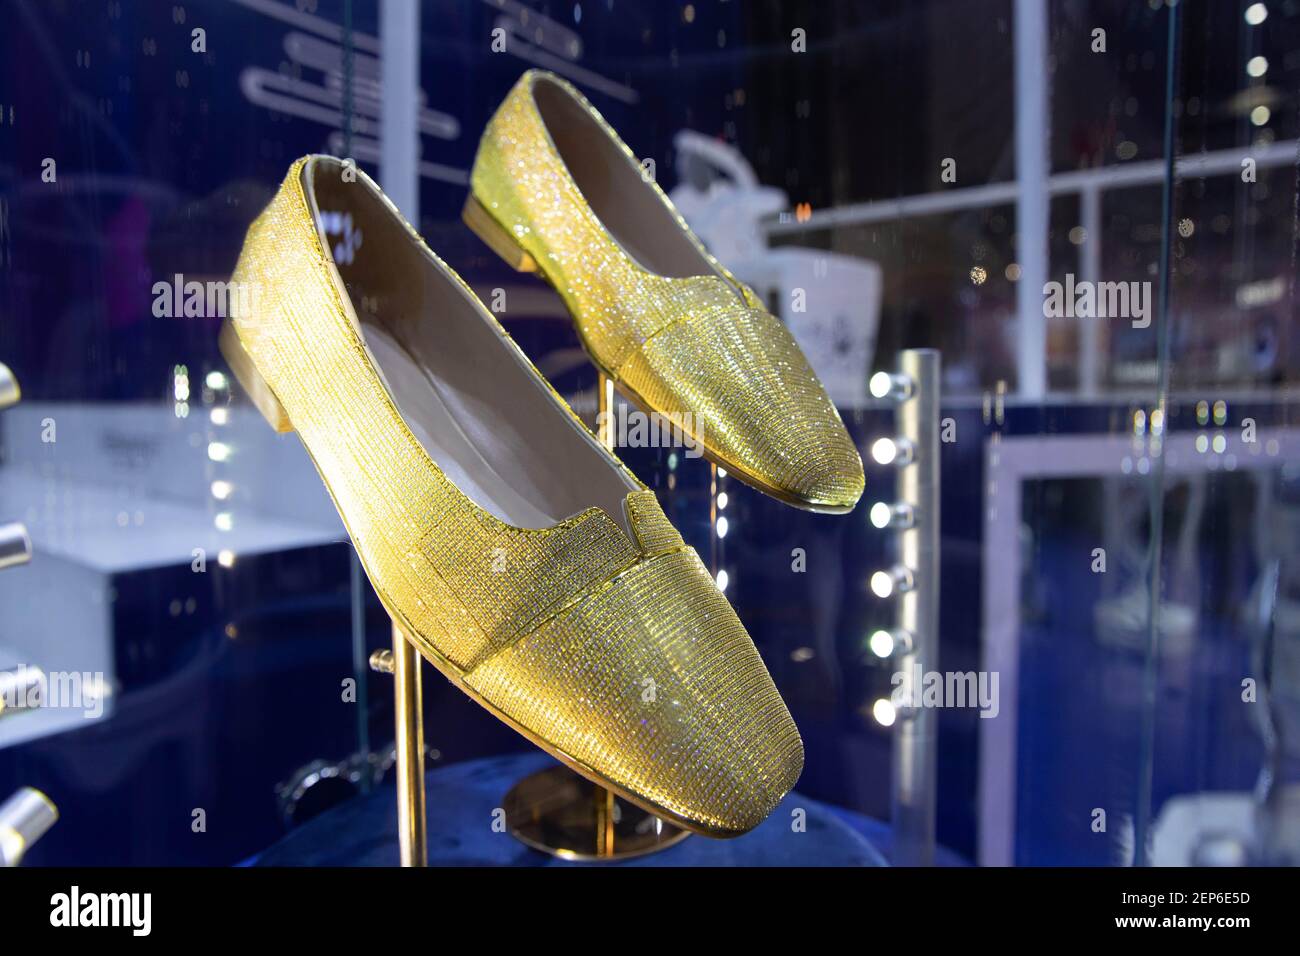 Copy of the shoes that designed by Jimmy Choo for Diana, Princess of Wales,  are exhibited at the second China International Import Expo (CIIE) at  National Exhibition and Convention Center (Shanghai) in